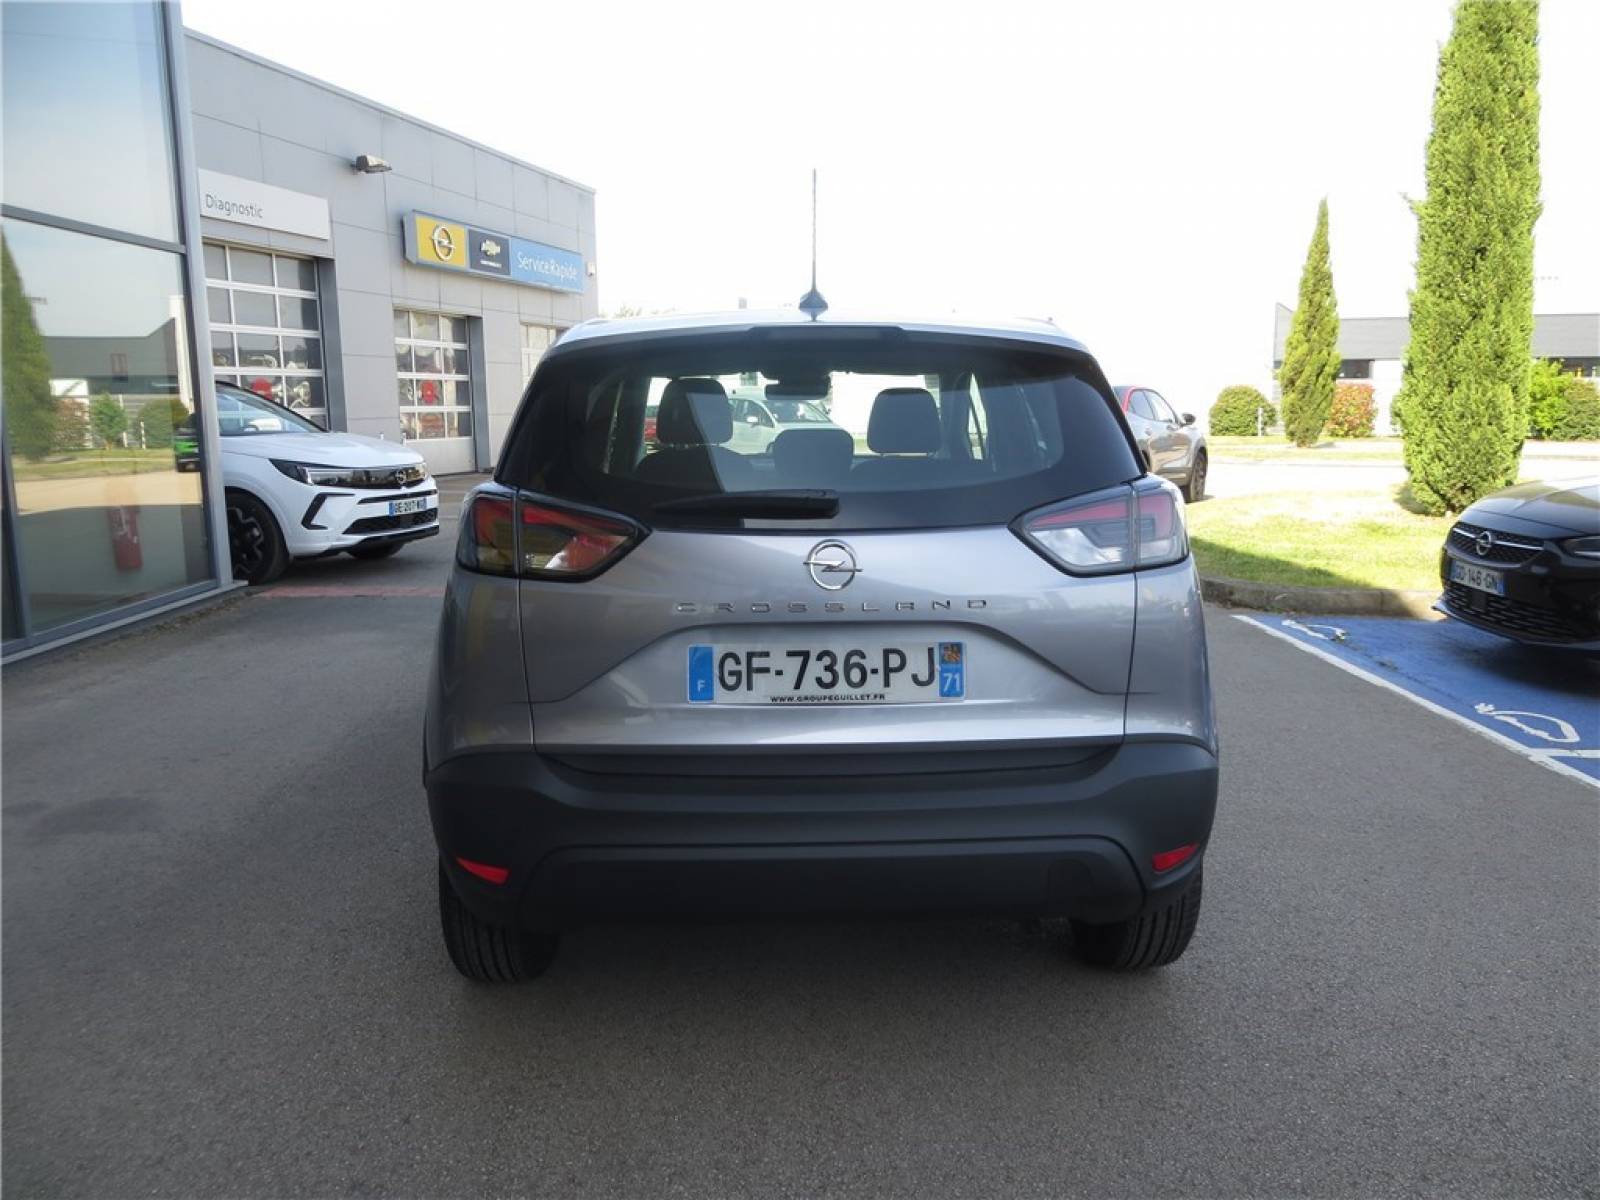 OPEL Crossland 1.2 83 ch - véhicule d'occasion - Groupe Guillet - Opel Magicauto Chalon - 71380 - Saint-Marcel - 9